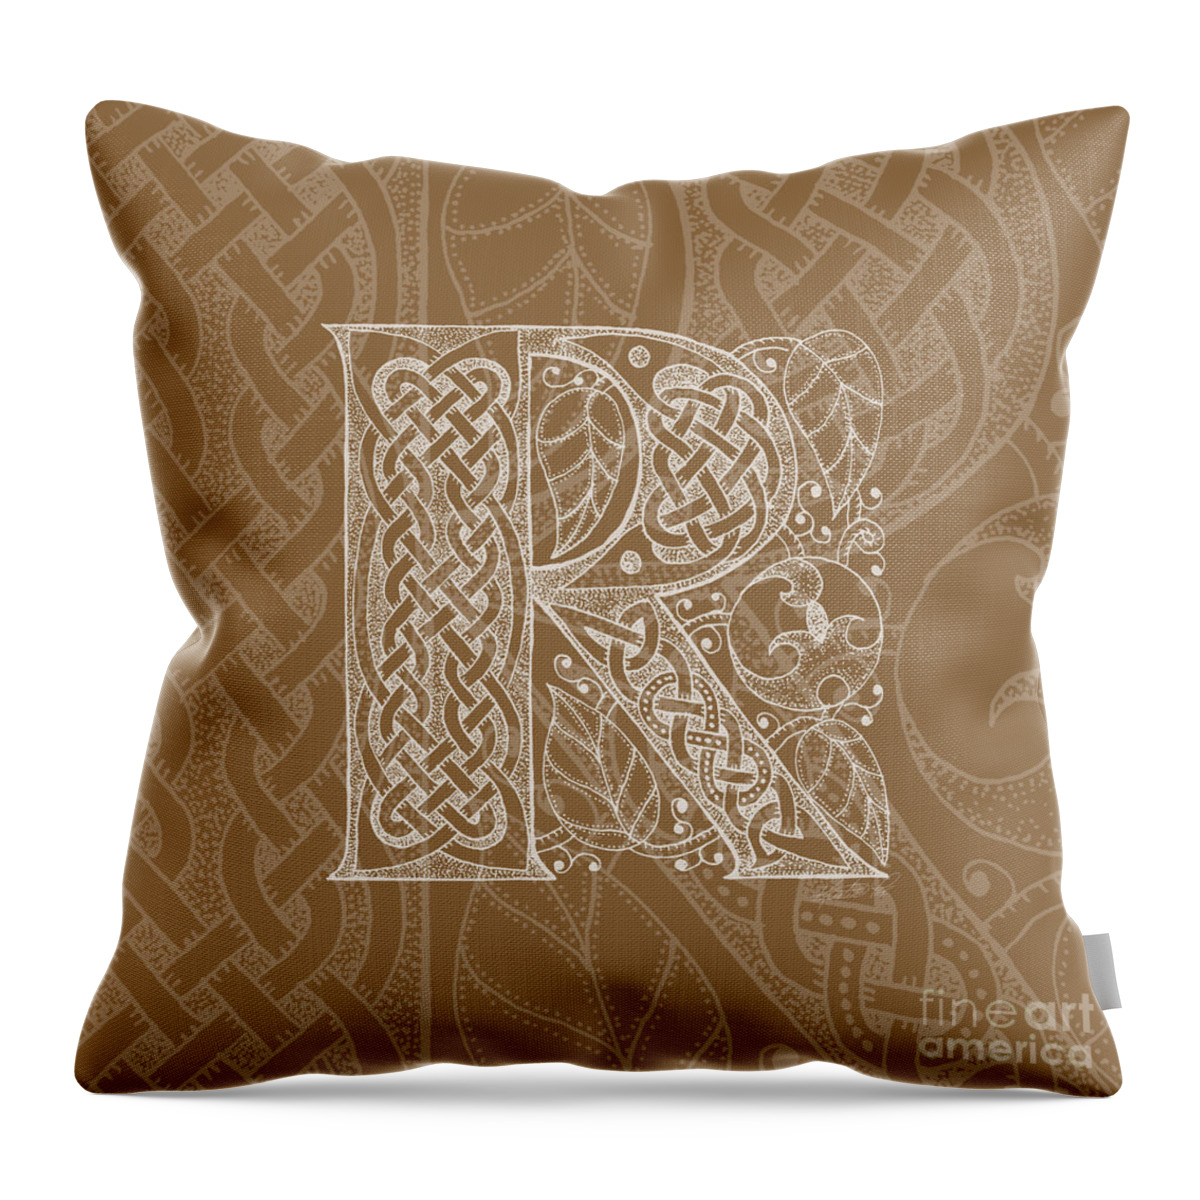 Artoffoxvox Throw Pillow featuring the mixed media Celtic Letter R Monogram by Kristen Fox